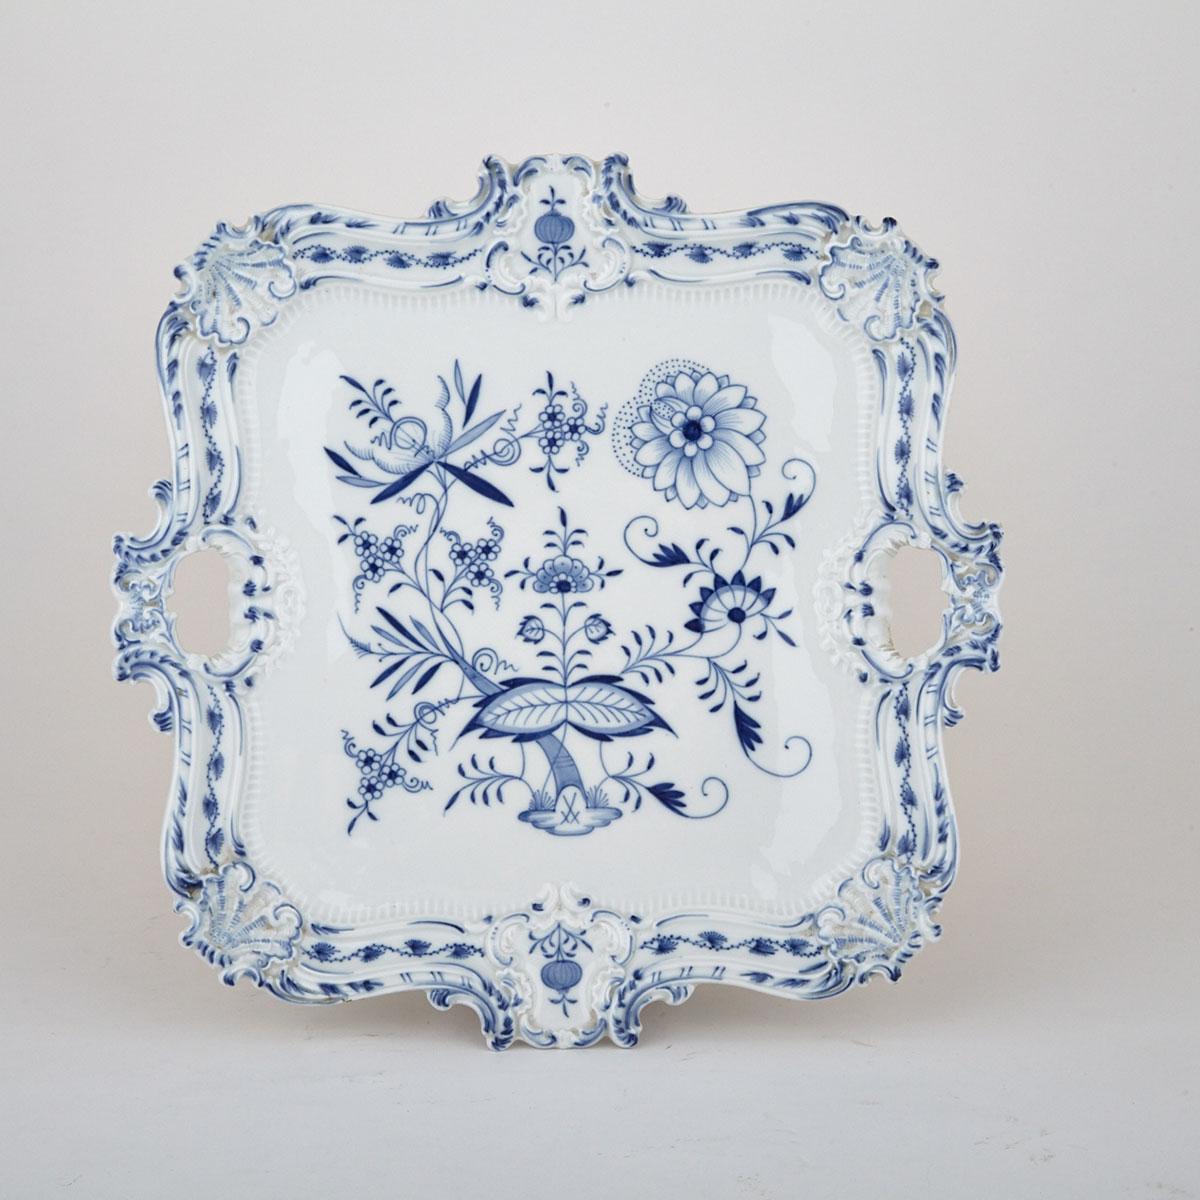 Meissen Blue Onion Pattern Two-Handled Square Serving Tray, late 19th century